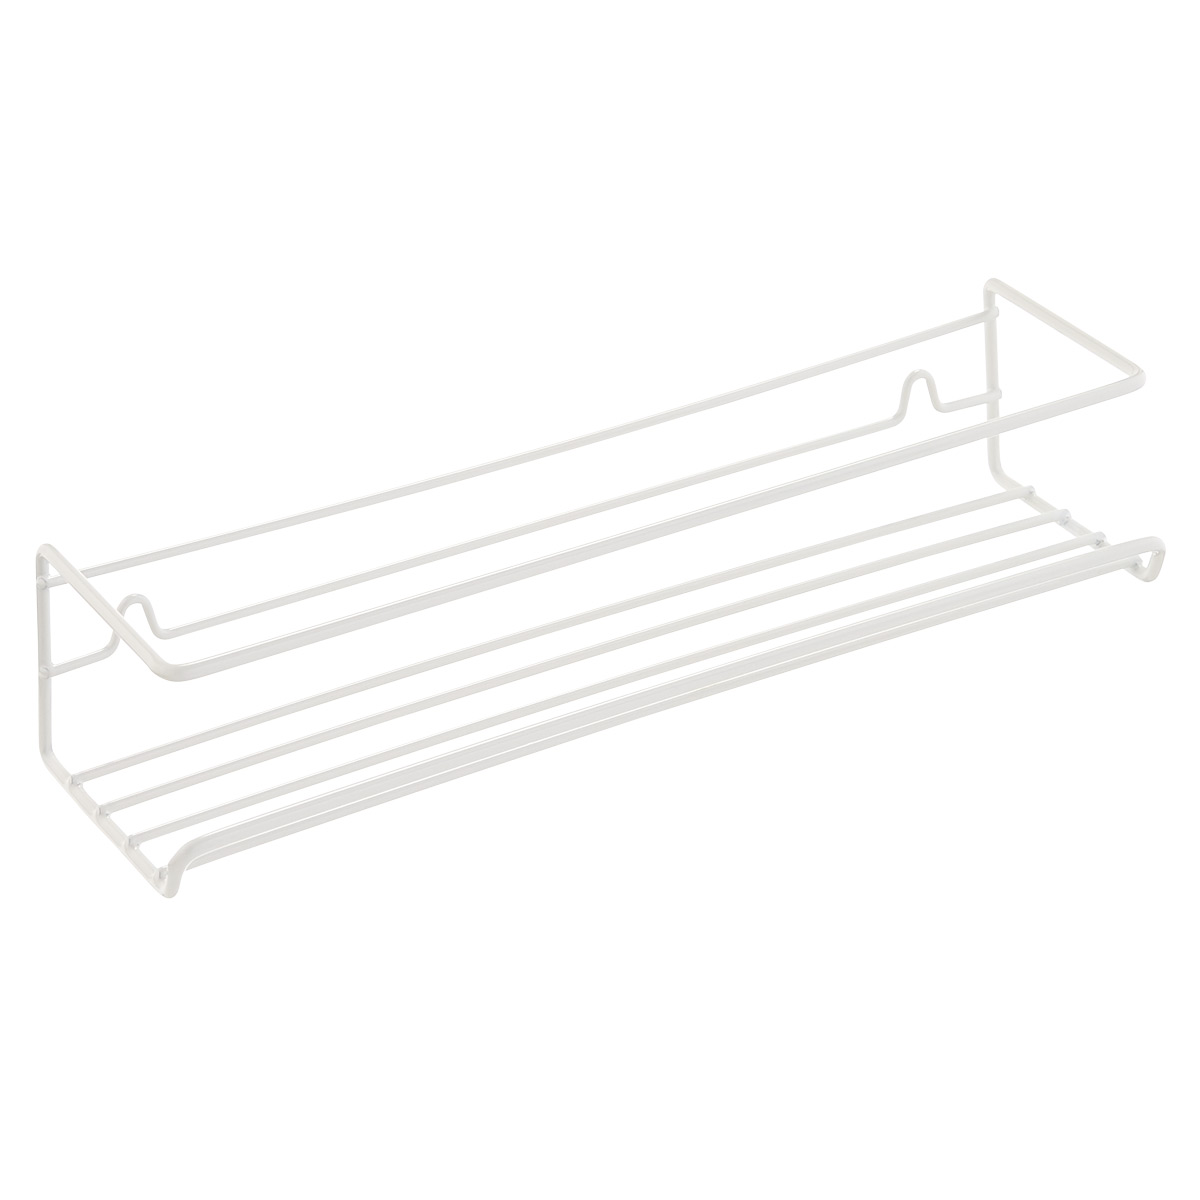 https://www.containerstore.com/catalogimages/417497/10074117_single_wire_spice_rack_whit.jpg